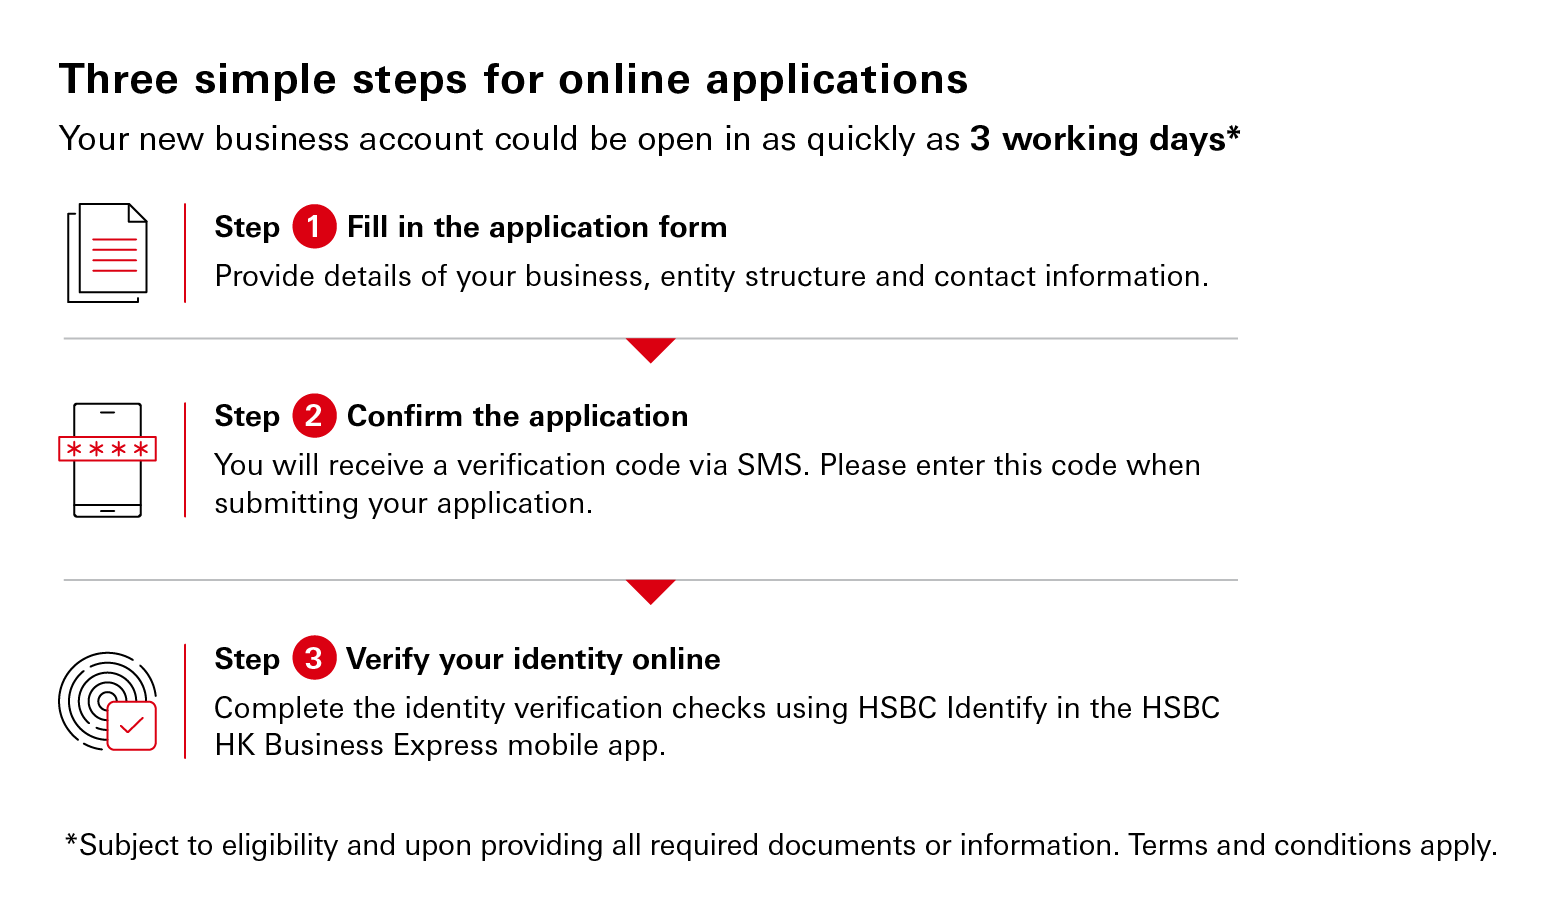 Three simple steps for online applications